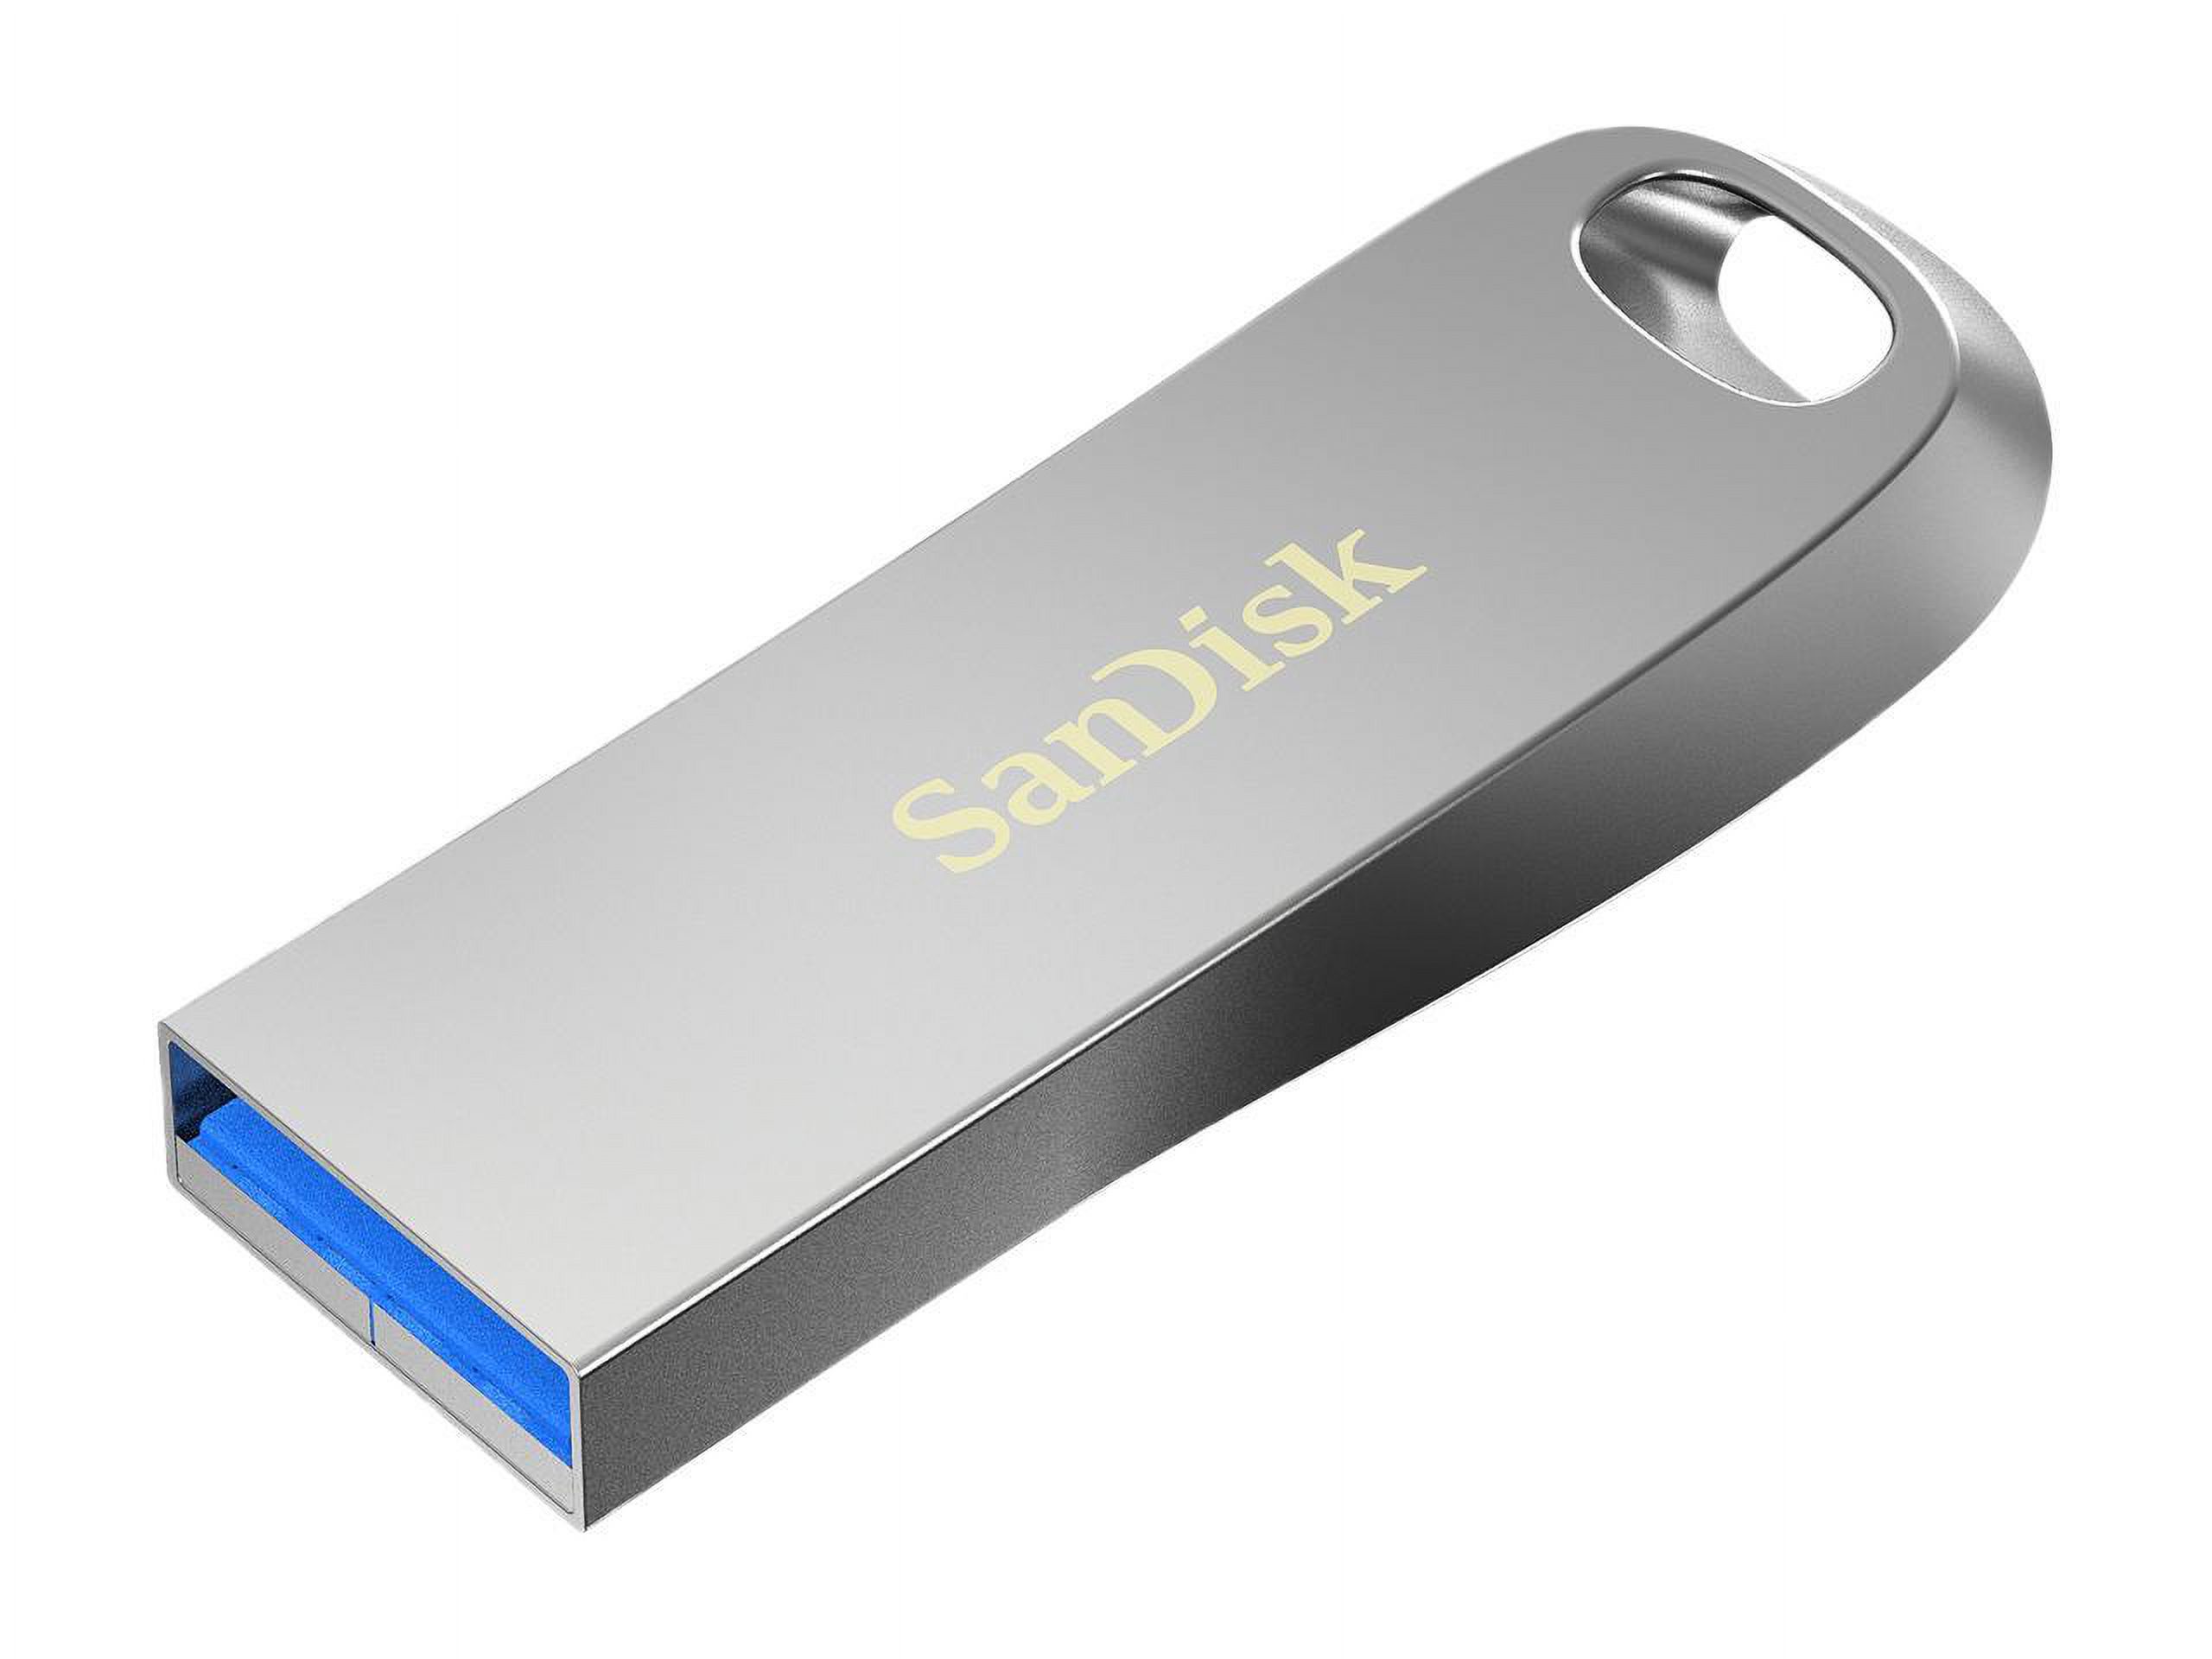 SanDisk 128GB Ultra Luxe USB 3.1 Flash Drive, Speed Up to 150MB/s (SDCZ74-128G-G46) - image 3 of 5